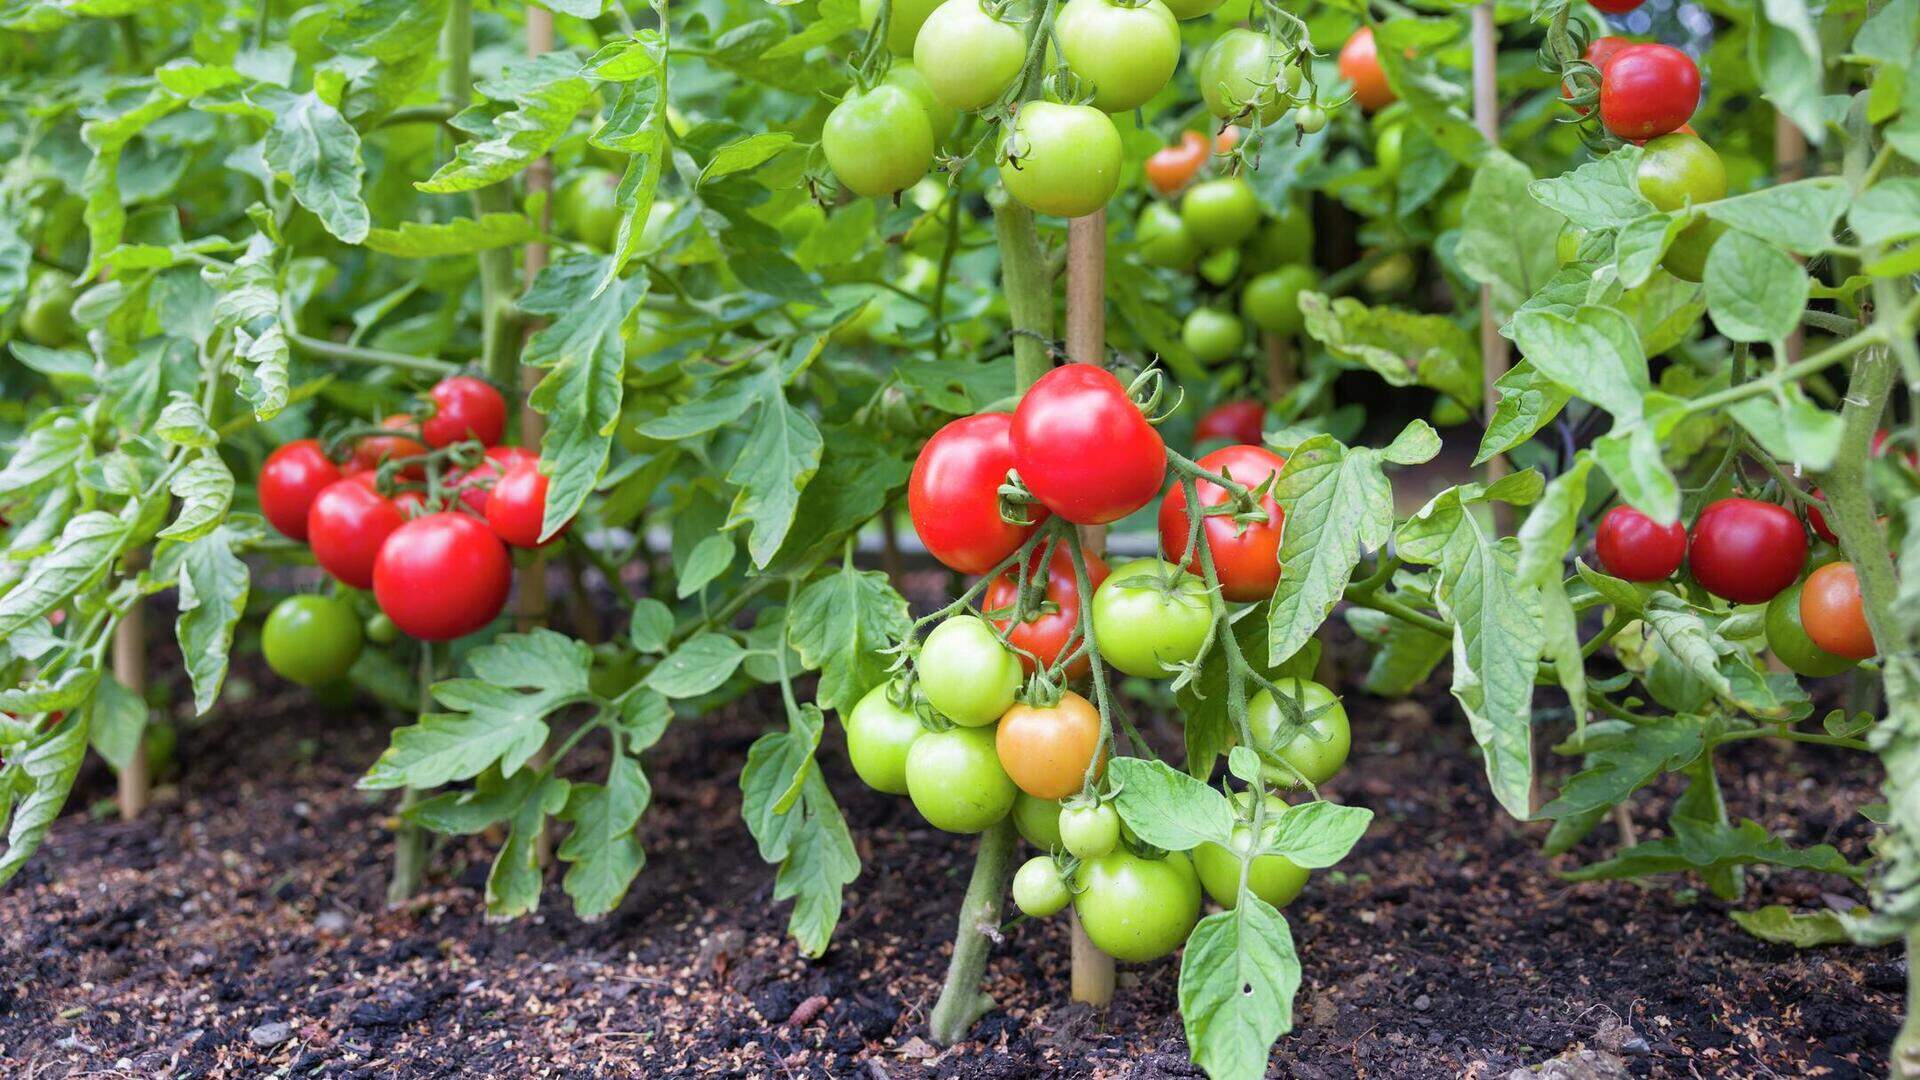 How Long Does It Take To Grow A Tomato From Seed